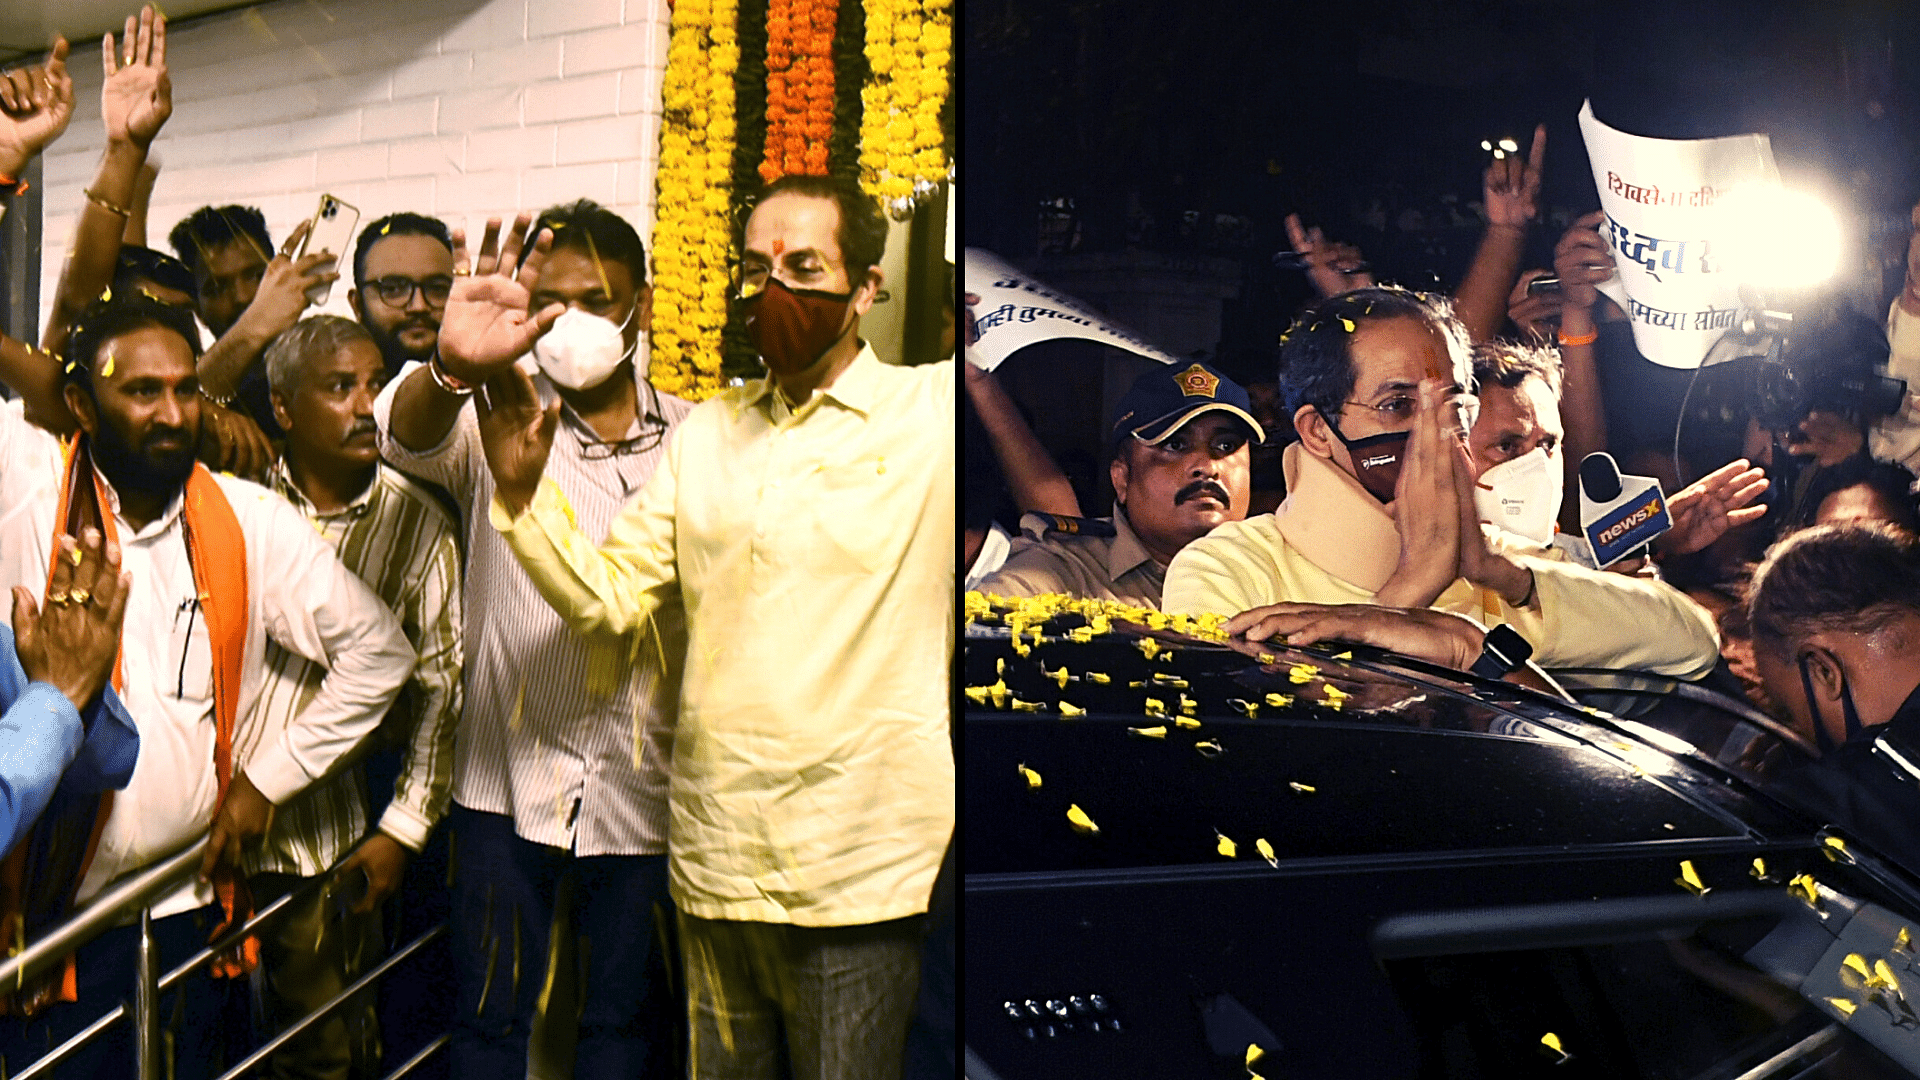 <div class="paragraphs"><p>After offering to quit as the CM, Thackeray left the official residence ‘Varsha,’ along with wife Rashmi Thackeray, sons Aaditya, who is a Cabinet minister, and Tejas Thackeray at around 9.50 pm, while Sena cadre raised slogans and showered petals on them.</p></div>